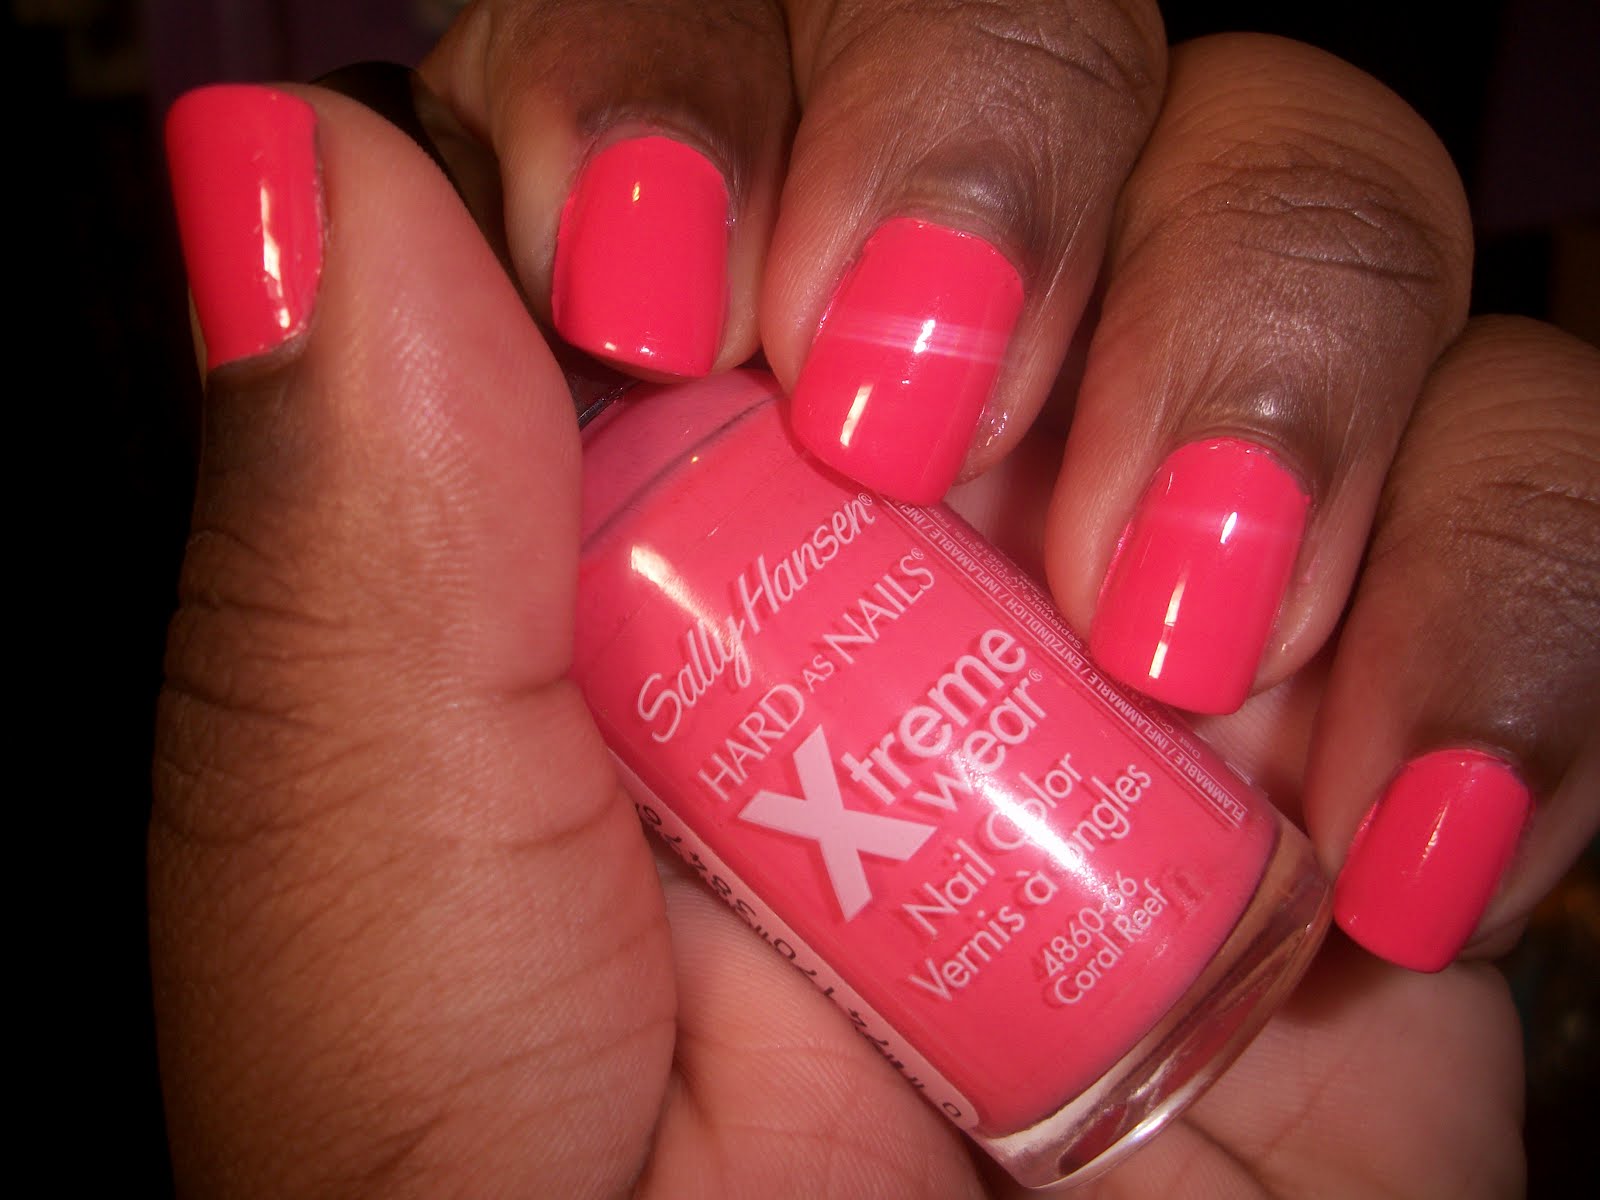 2. Essie Nail Polish in "Coral Reef" - wide 1